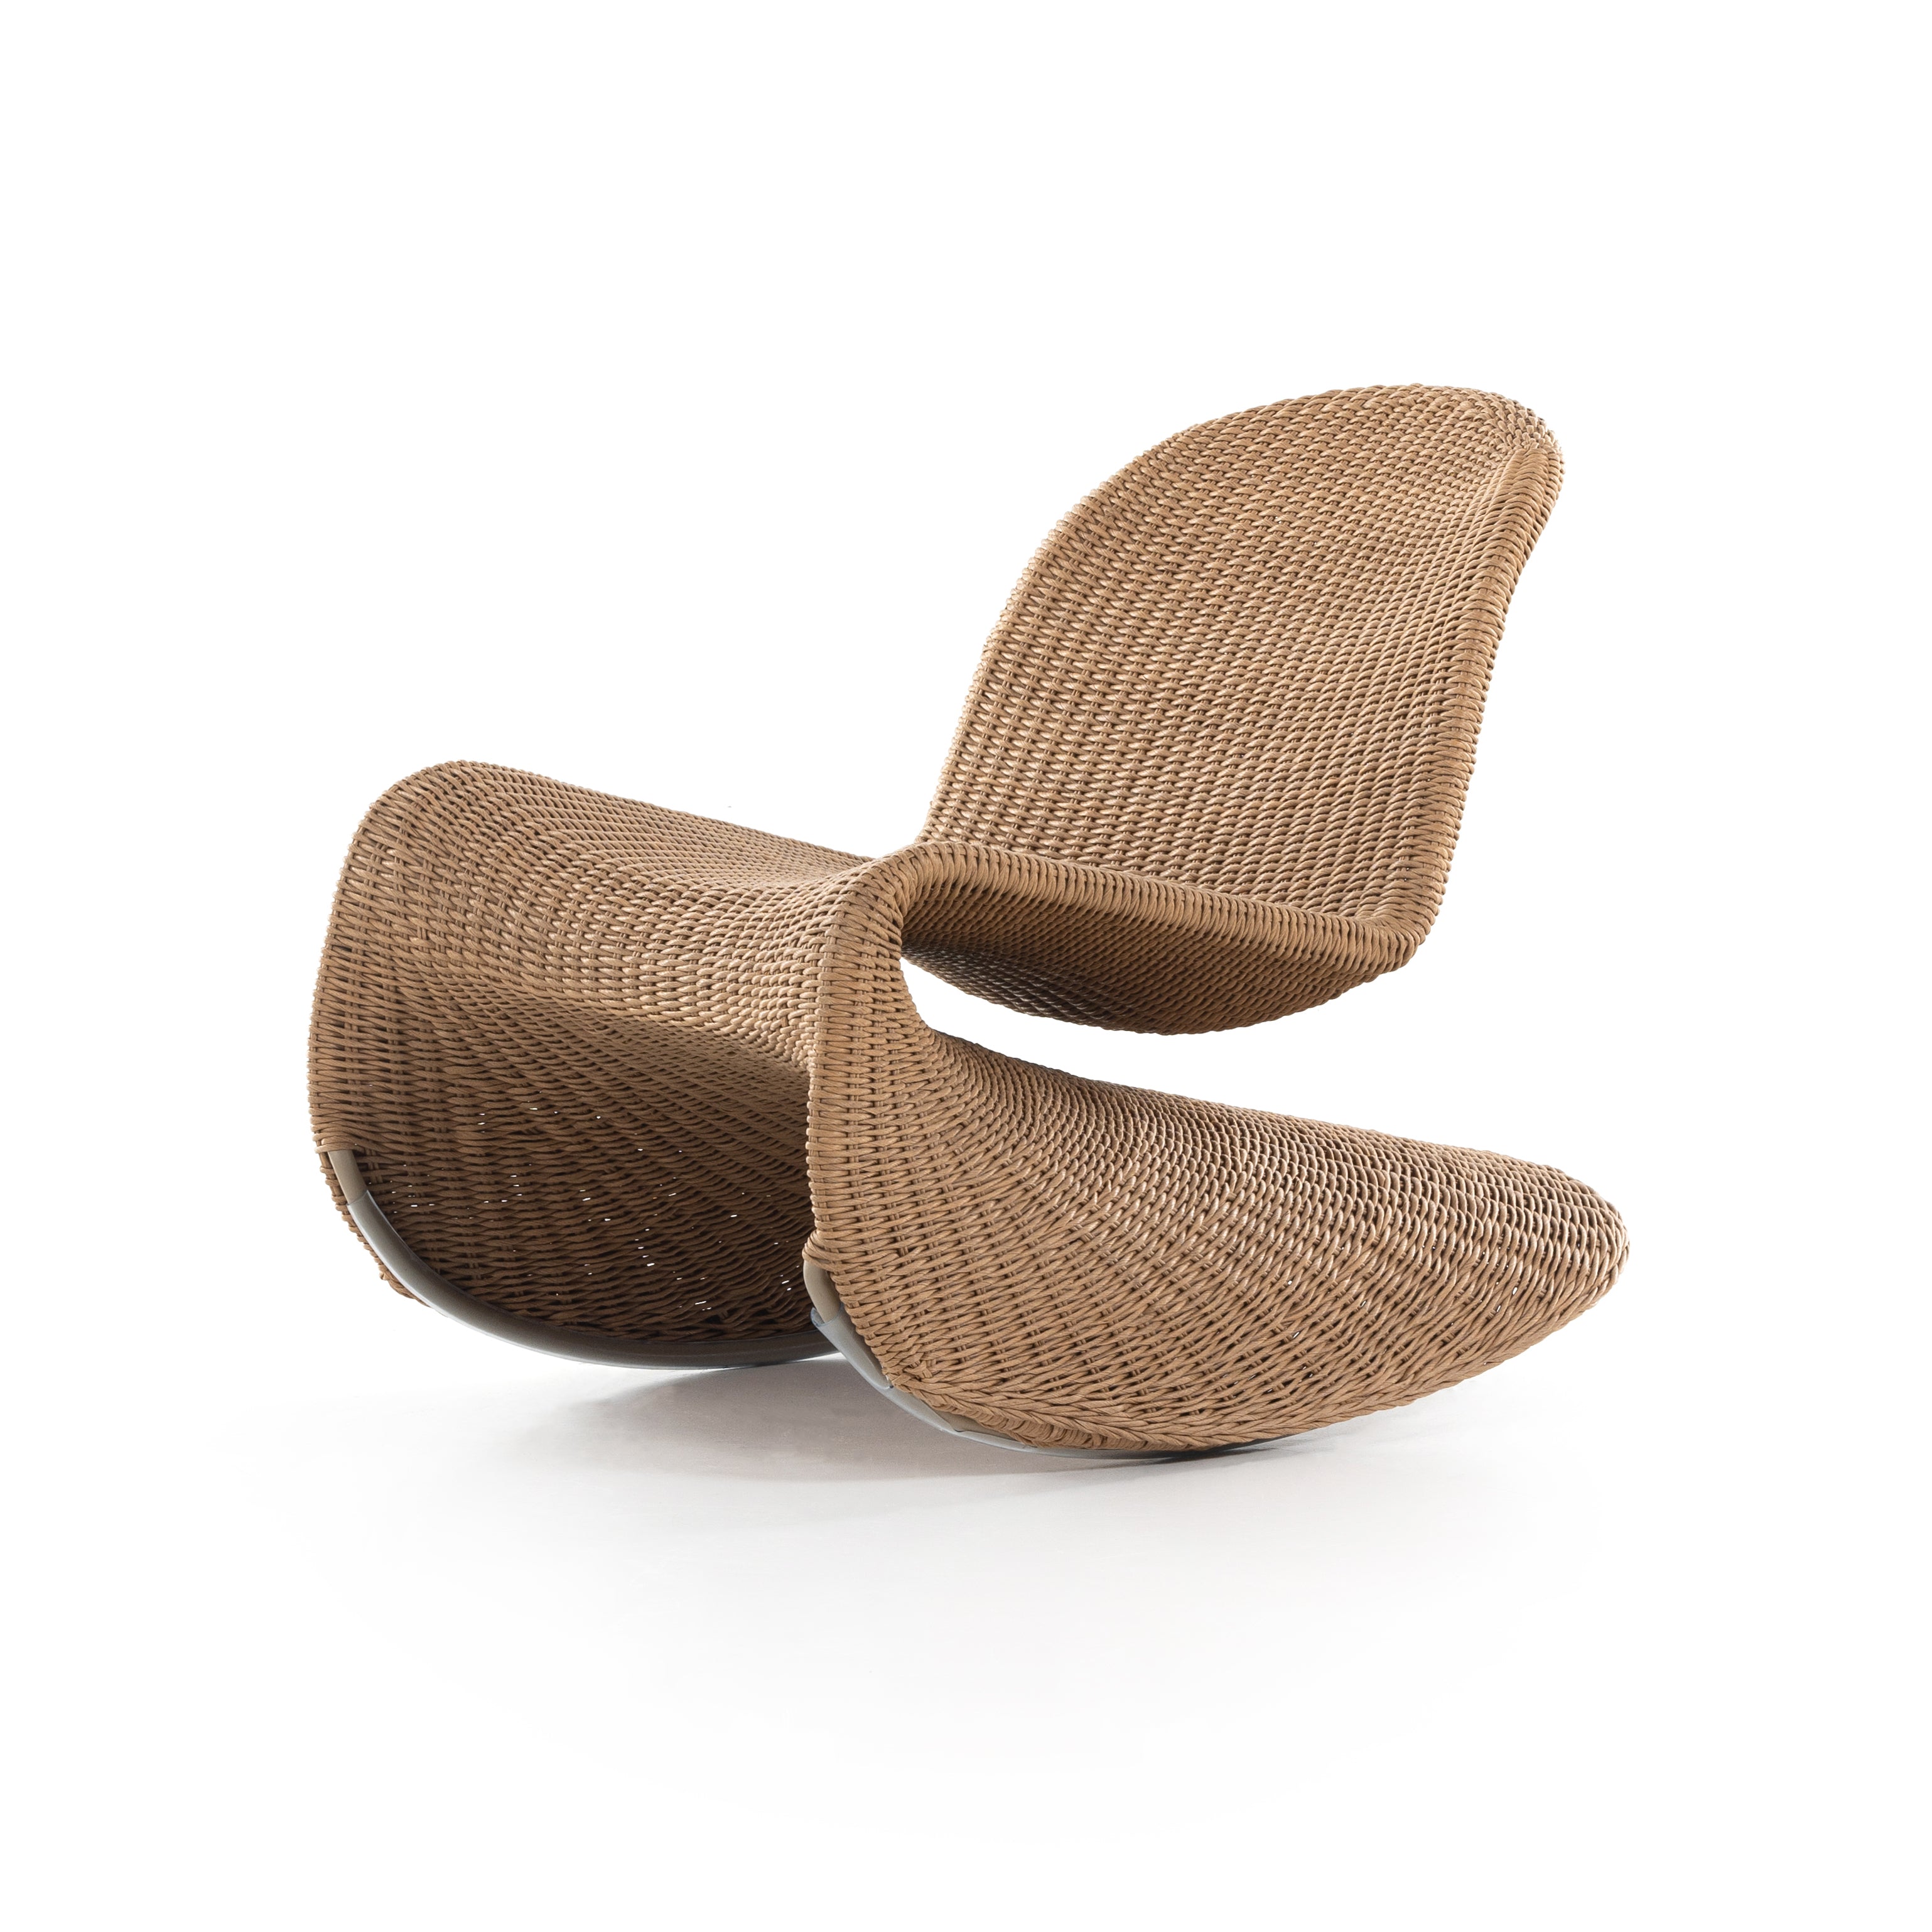 Based off a vintage shape, all-weather wicker seating brings dramatic curves to this statement-making rocking chair. Cover or store indoors during inclement weather and when not in use. Amethyst Home provides interior design, new construction, custom furniture, and area rugs in the Calabasas metro area.